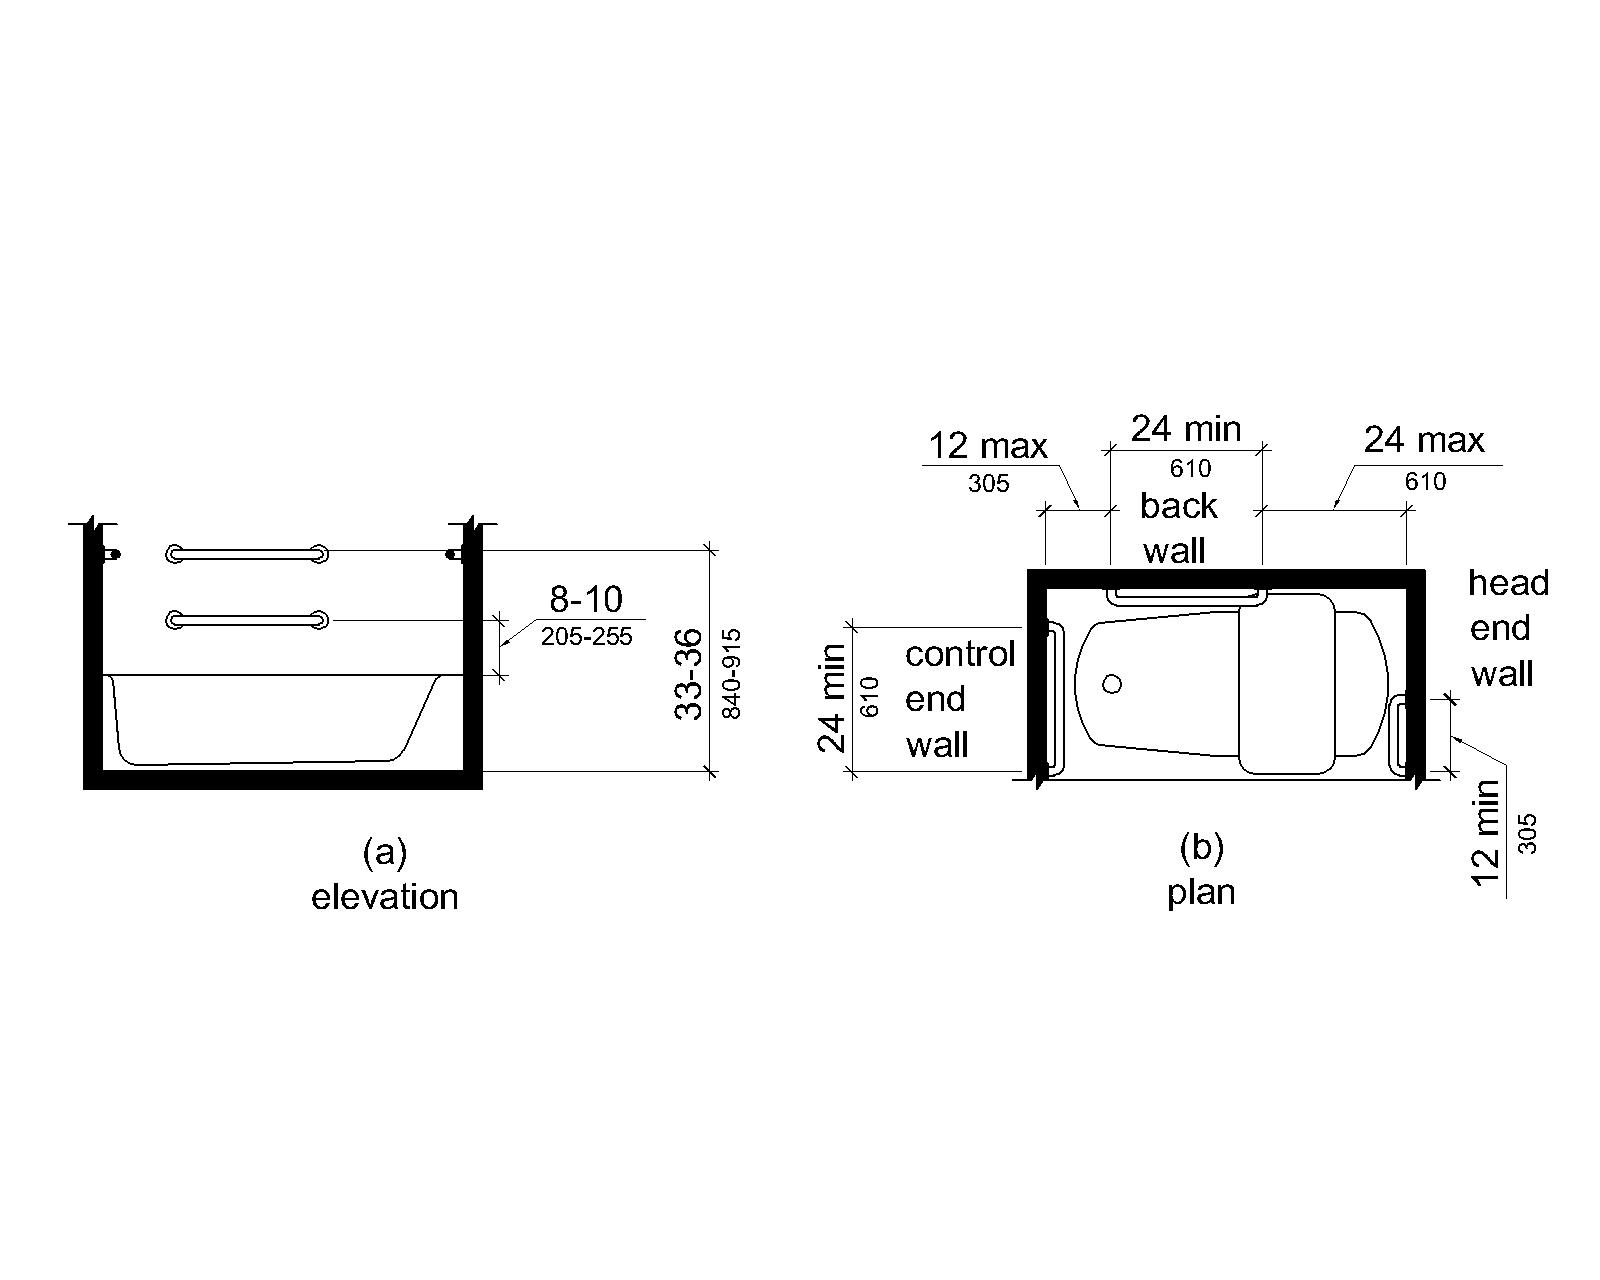 Figure (a) is an elevation drawing showing rear grab bars, one mounted 33 to 36 inches (840 to 915 mm) above the finish deck surface, and one mounted 8 to 10 inches (205 to 255 mm) above the tub rim. Figure (b) is a plan view showing a grab bar on the foot (control) end wall 24 inches (610 mm) long minimum installed at the front edge of the tub. Rear grab bars are 24 inches (610 mm) long minimum and are mounted 12 inches (305 mm) maximum from the foot (control) end wall and 24 inches (610 mm) maximum from the head end wall. A grab bar 12 inches (305 mm) long minimum is installed on the head end wall at the front edge of the tub.